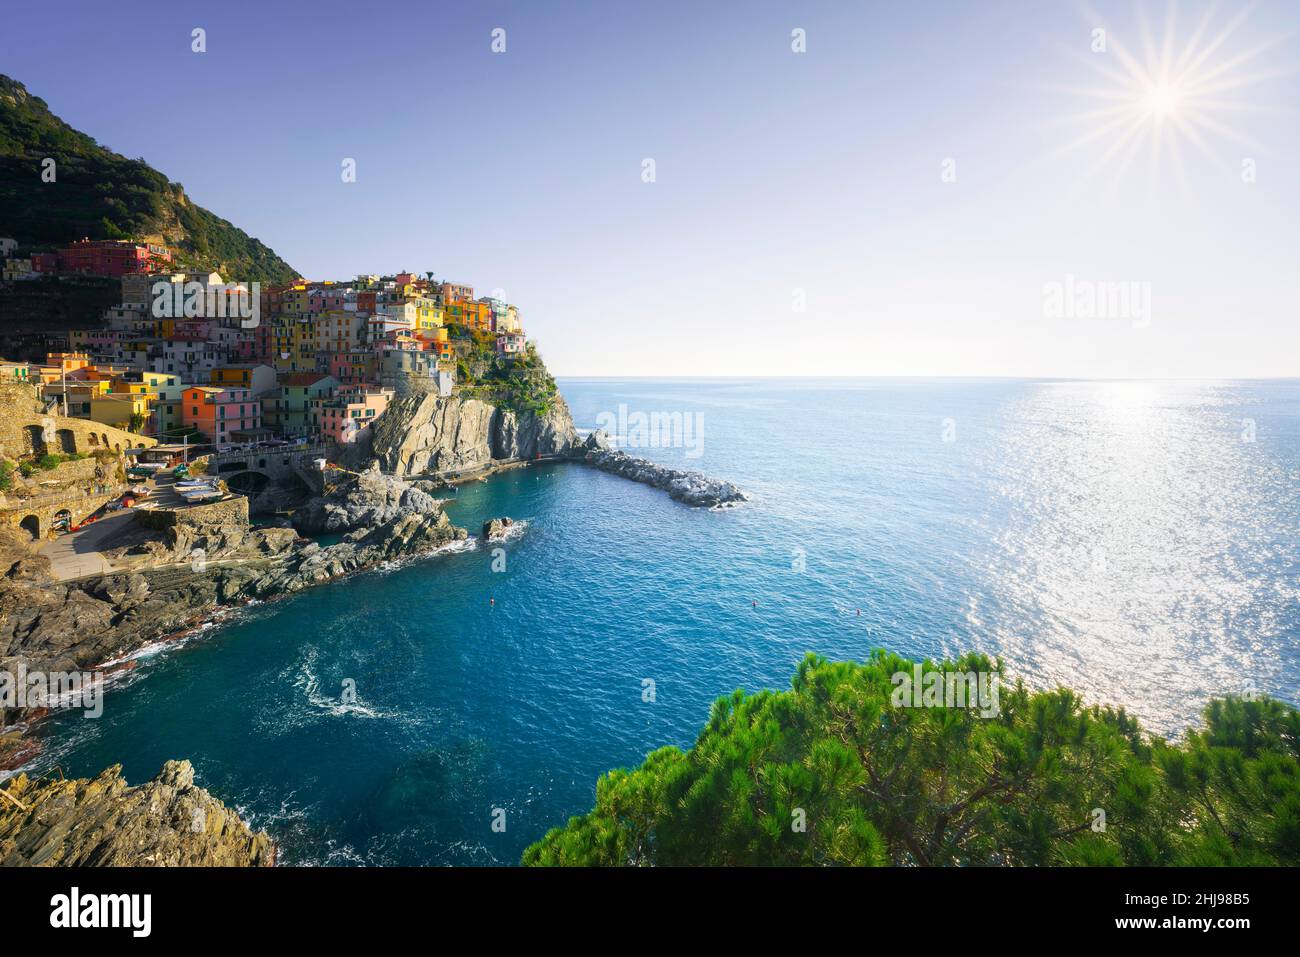 Manarola, village on the rocks, on a clear day. Seascape in Cinque Terre National Park, Unesco Site, Liguria region, Italy, Europe. Stock Photo